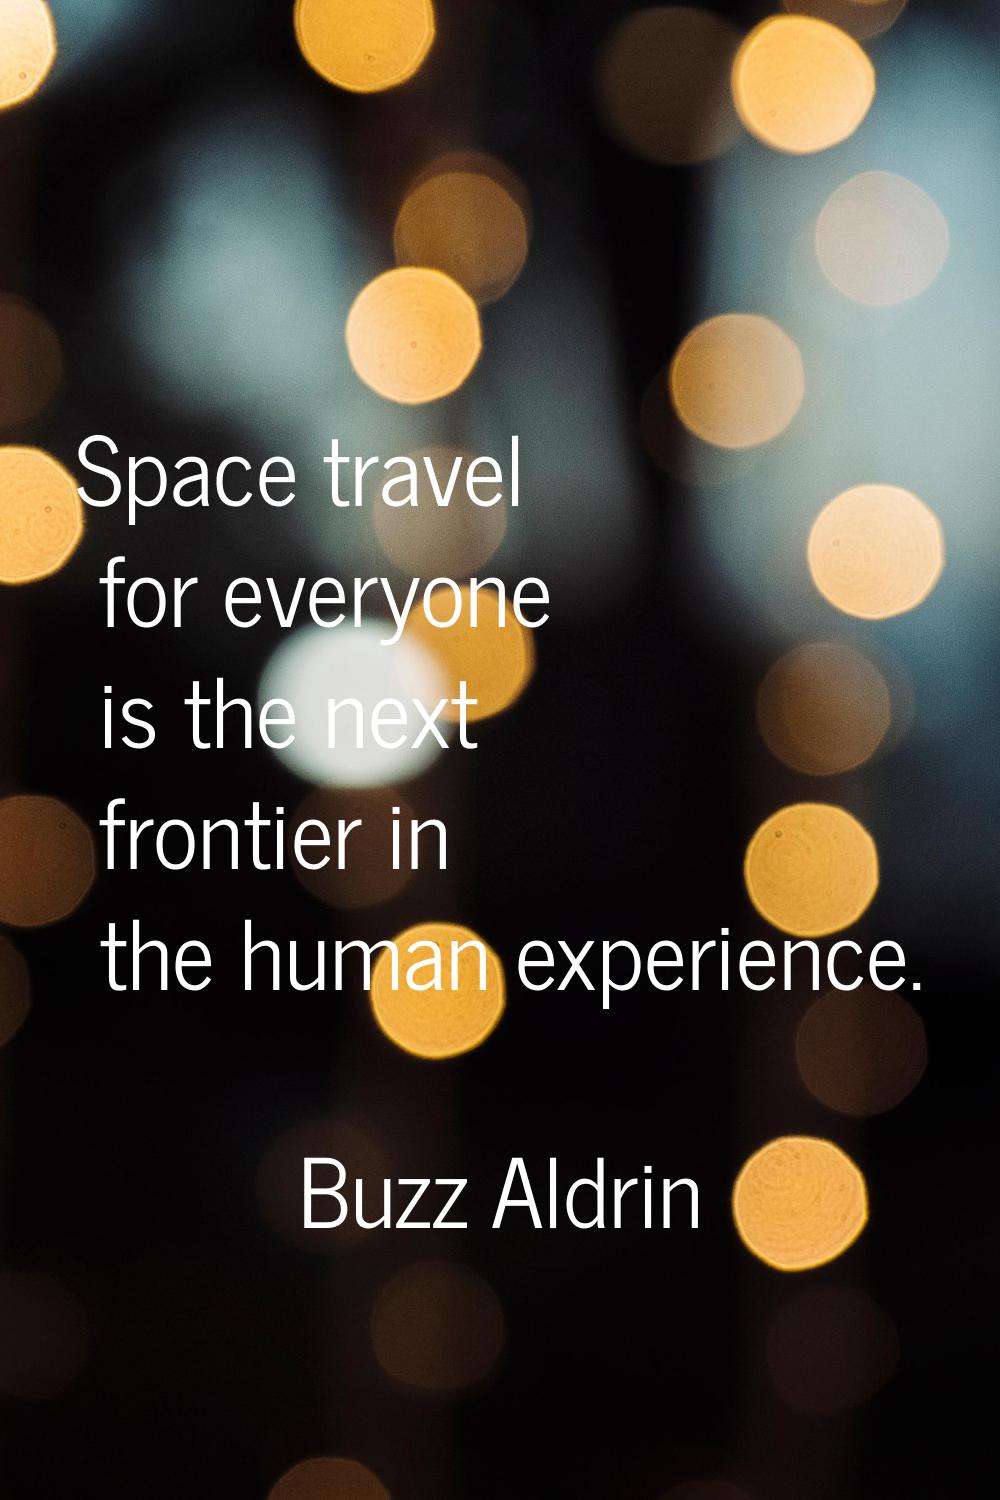 Space travel for everyone is the next frontier in the human experience.